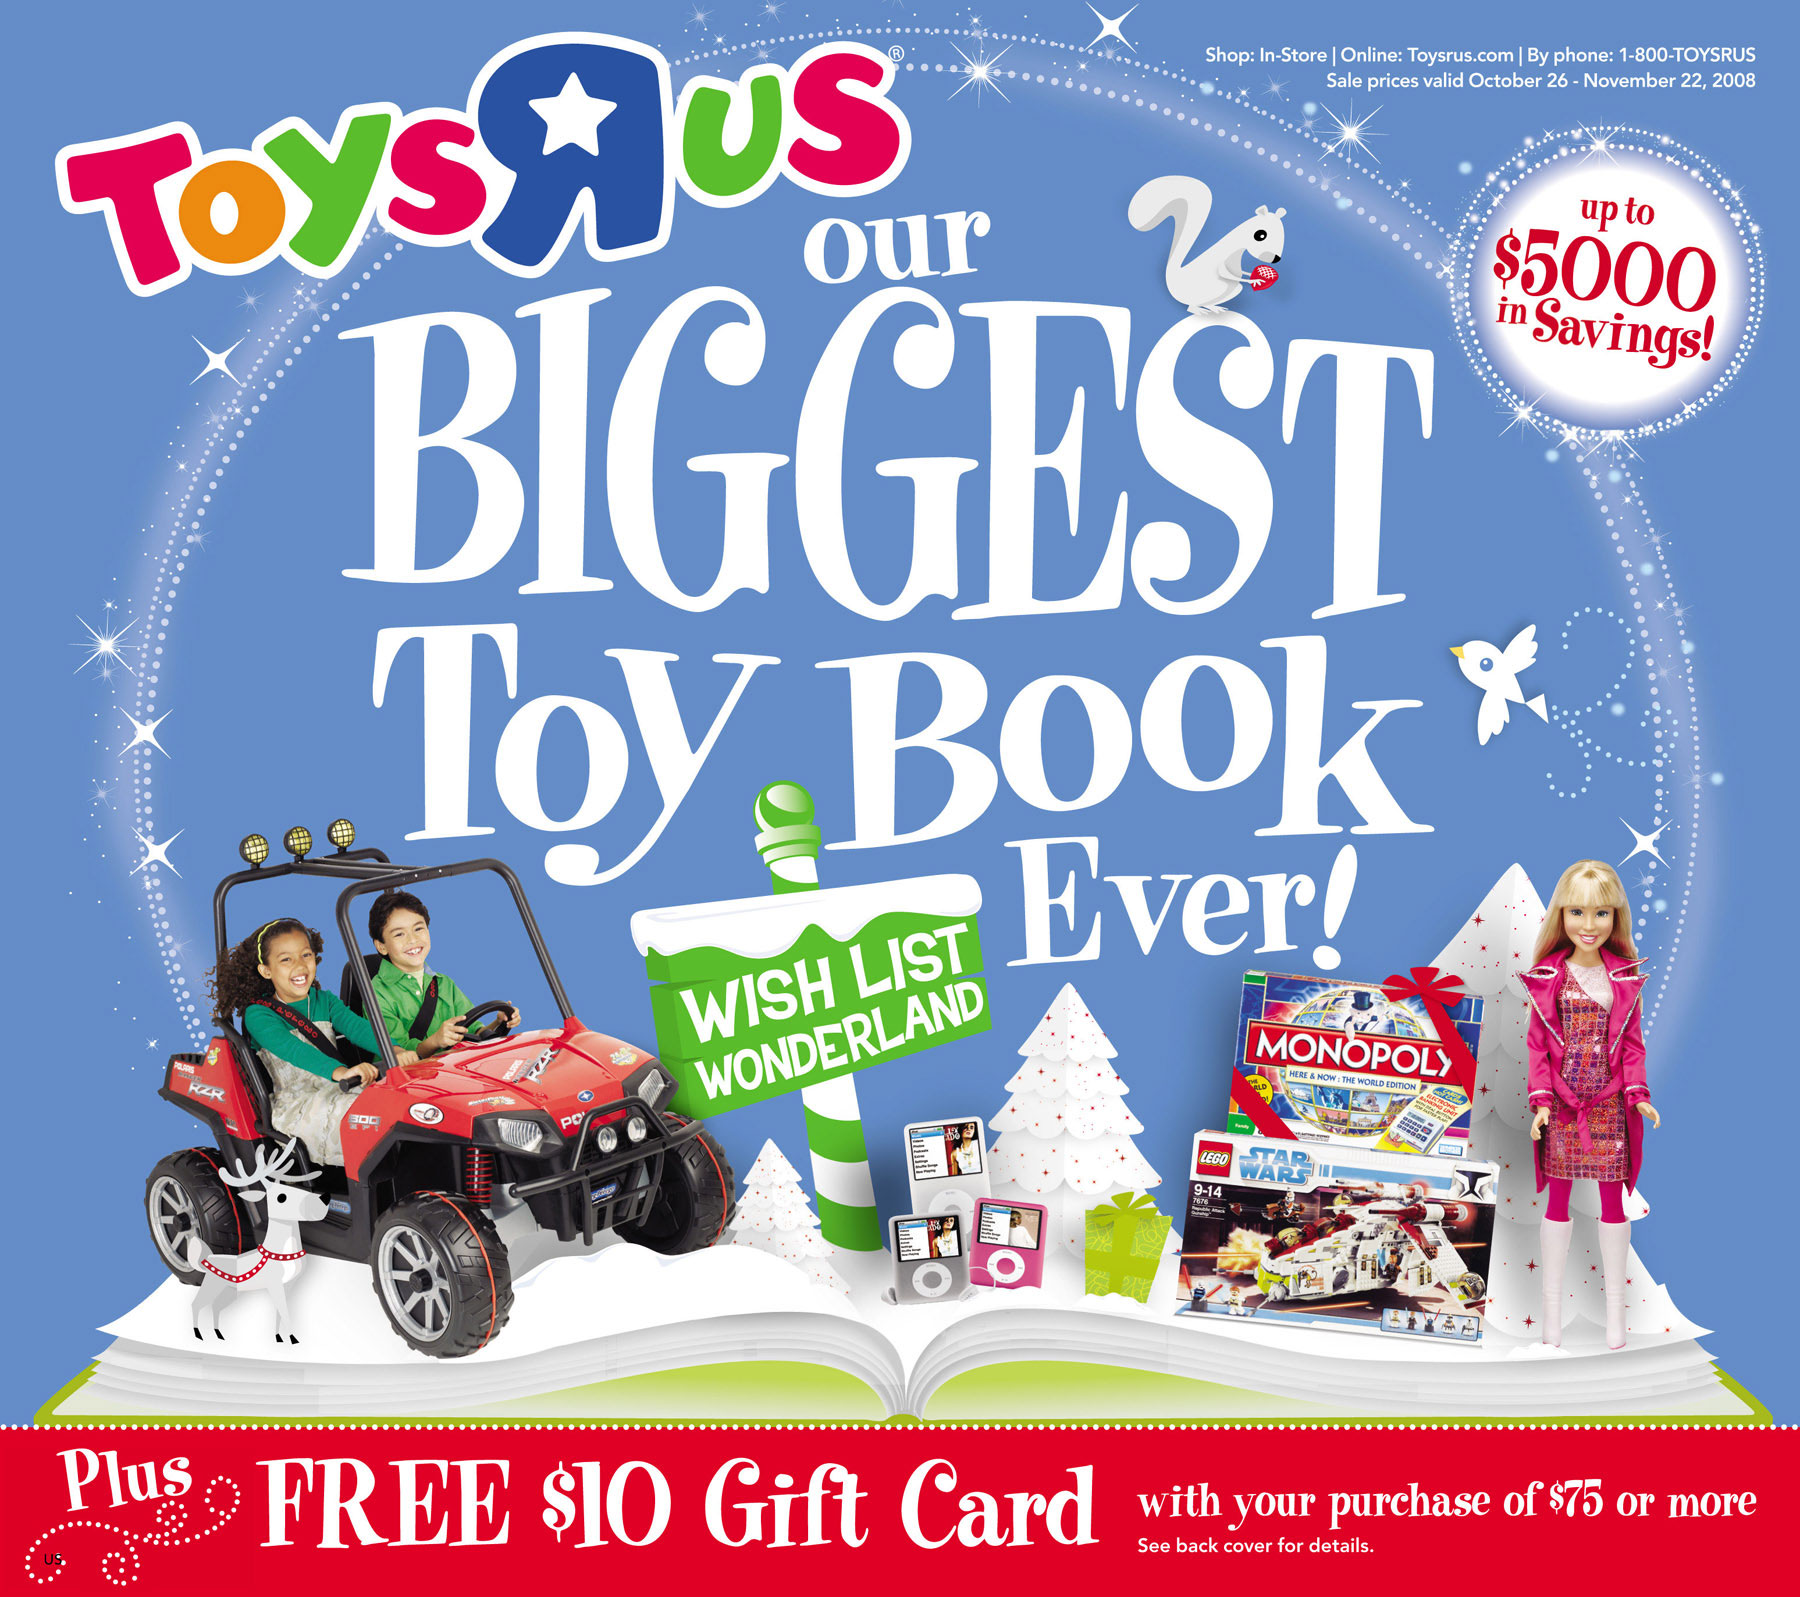 Toys r us the big book. TOYSRUS Christmas Japan. Complete the toys